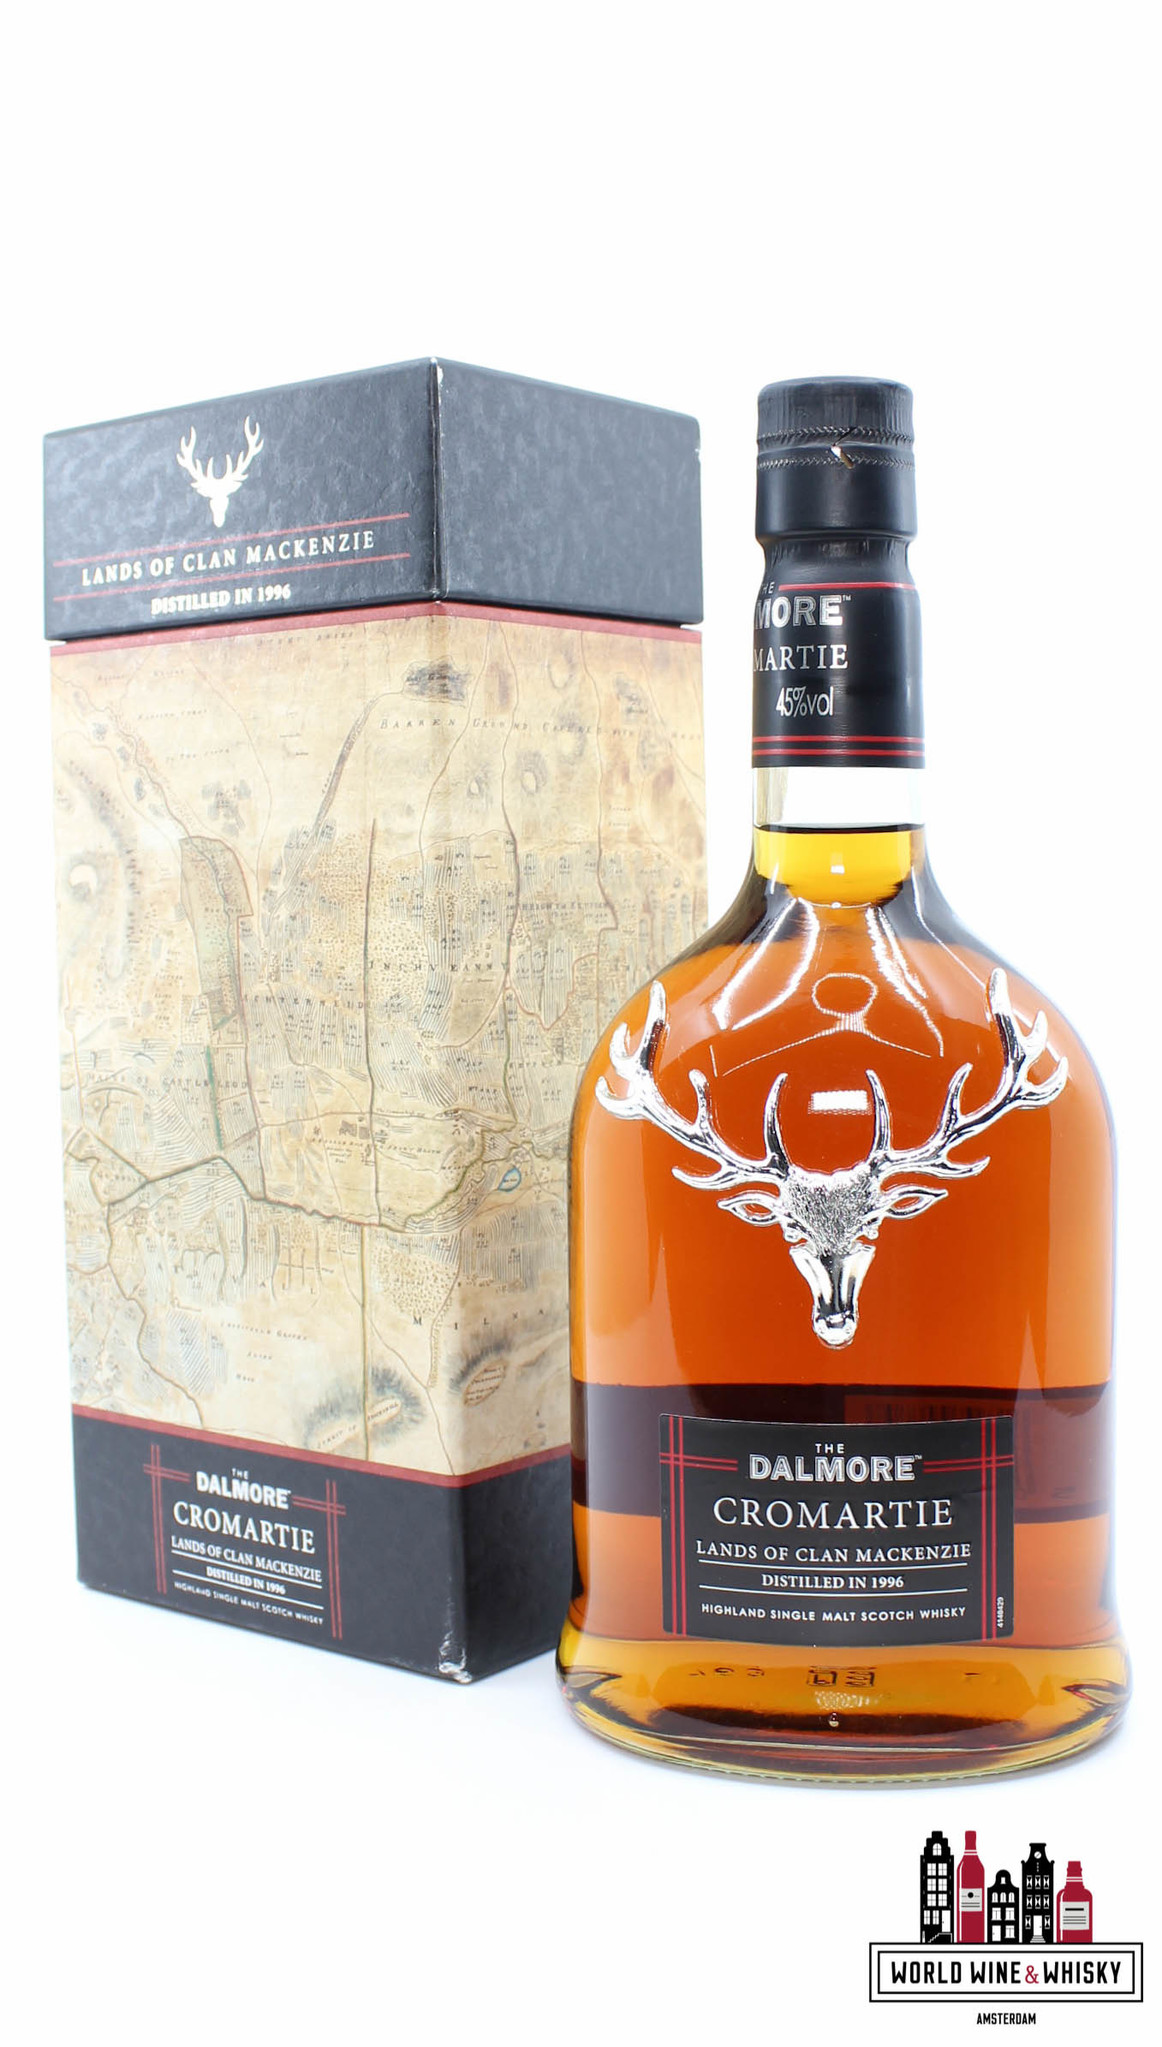 Dalmore Dalmore 15 Years Old 1996 2012 - Cromartie - Lands of Clan MacKenzie 45% (1 of 7500)